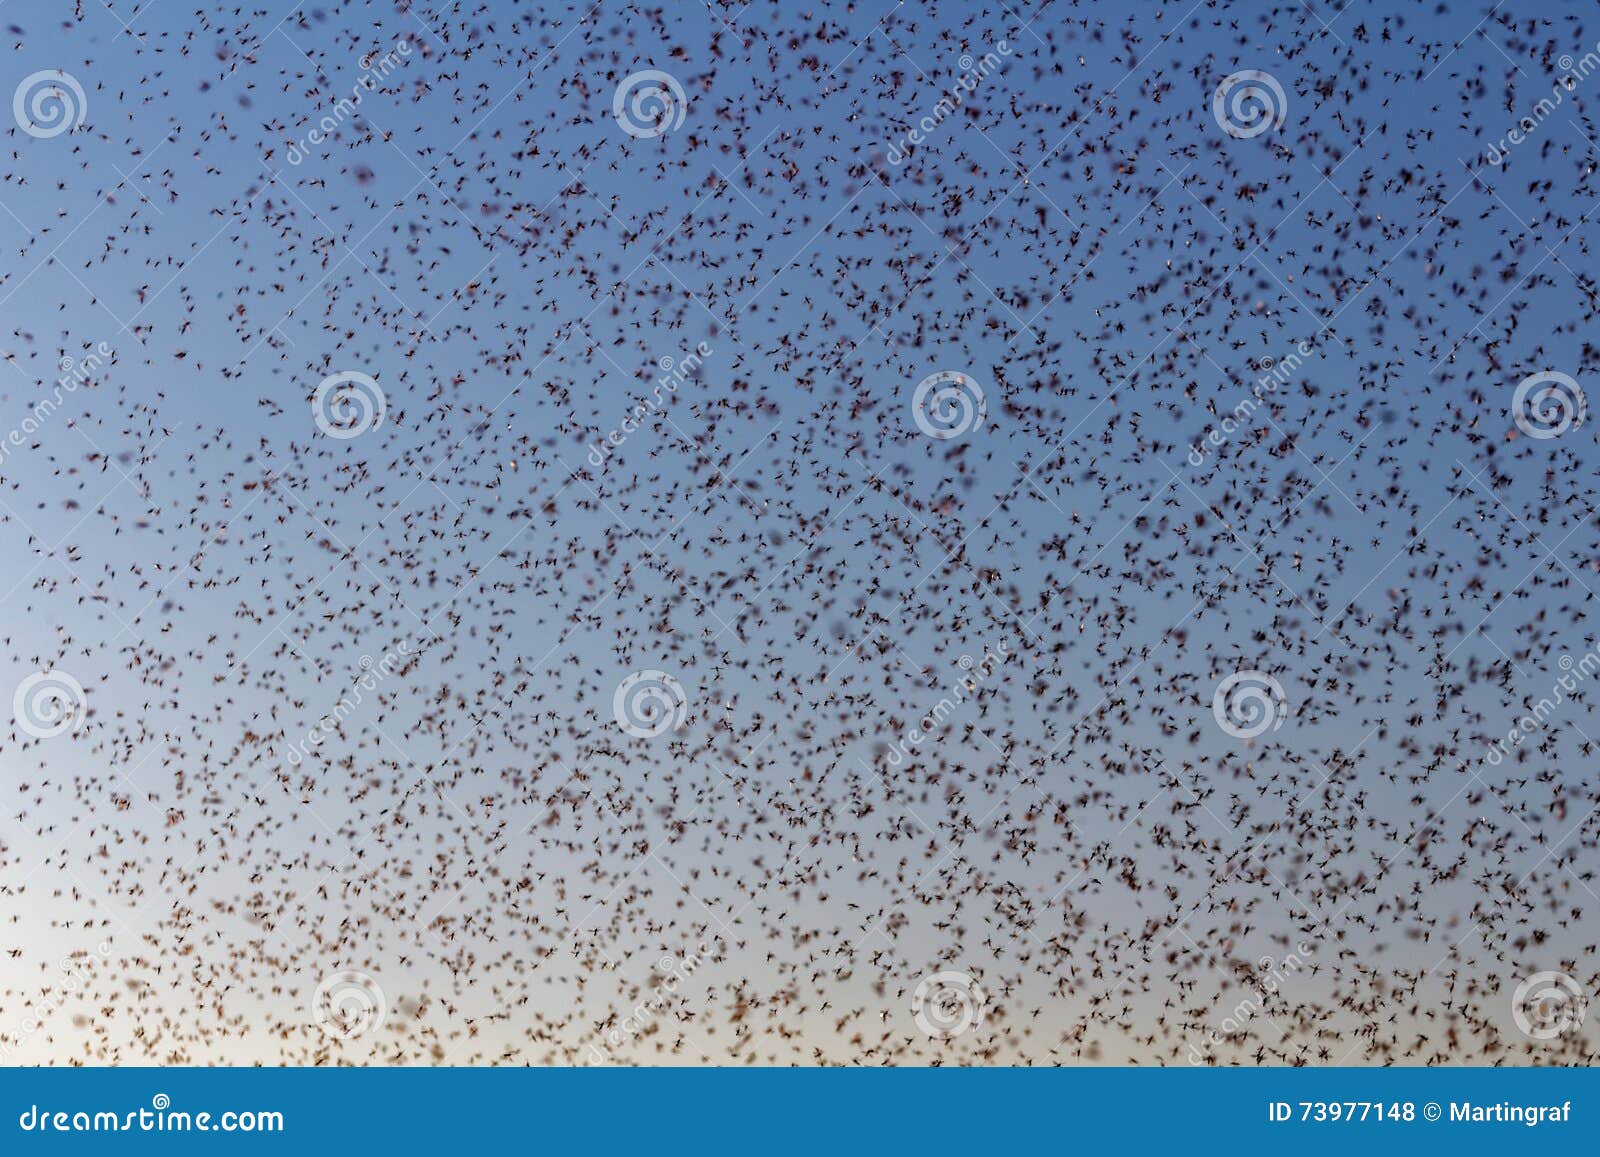 swarm of flies by sunset in summer